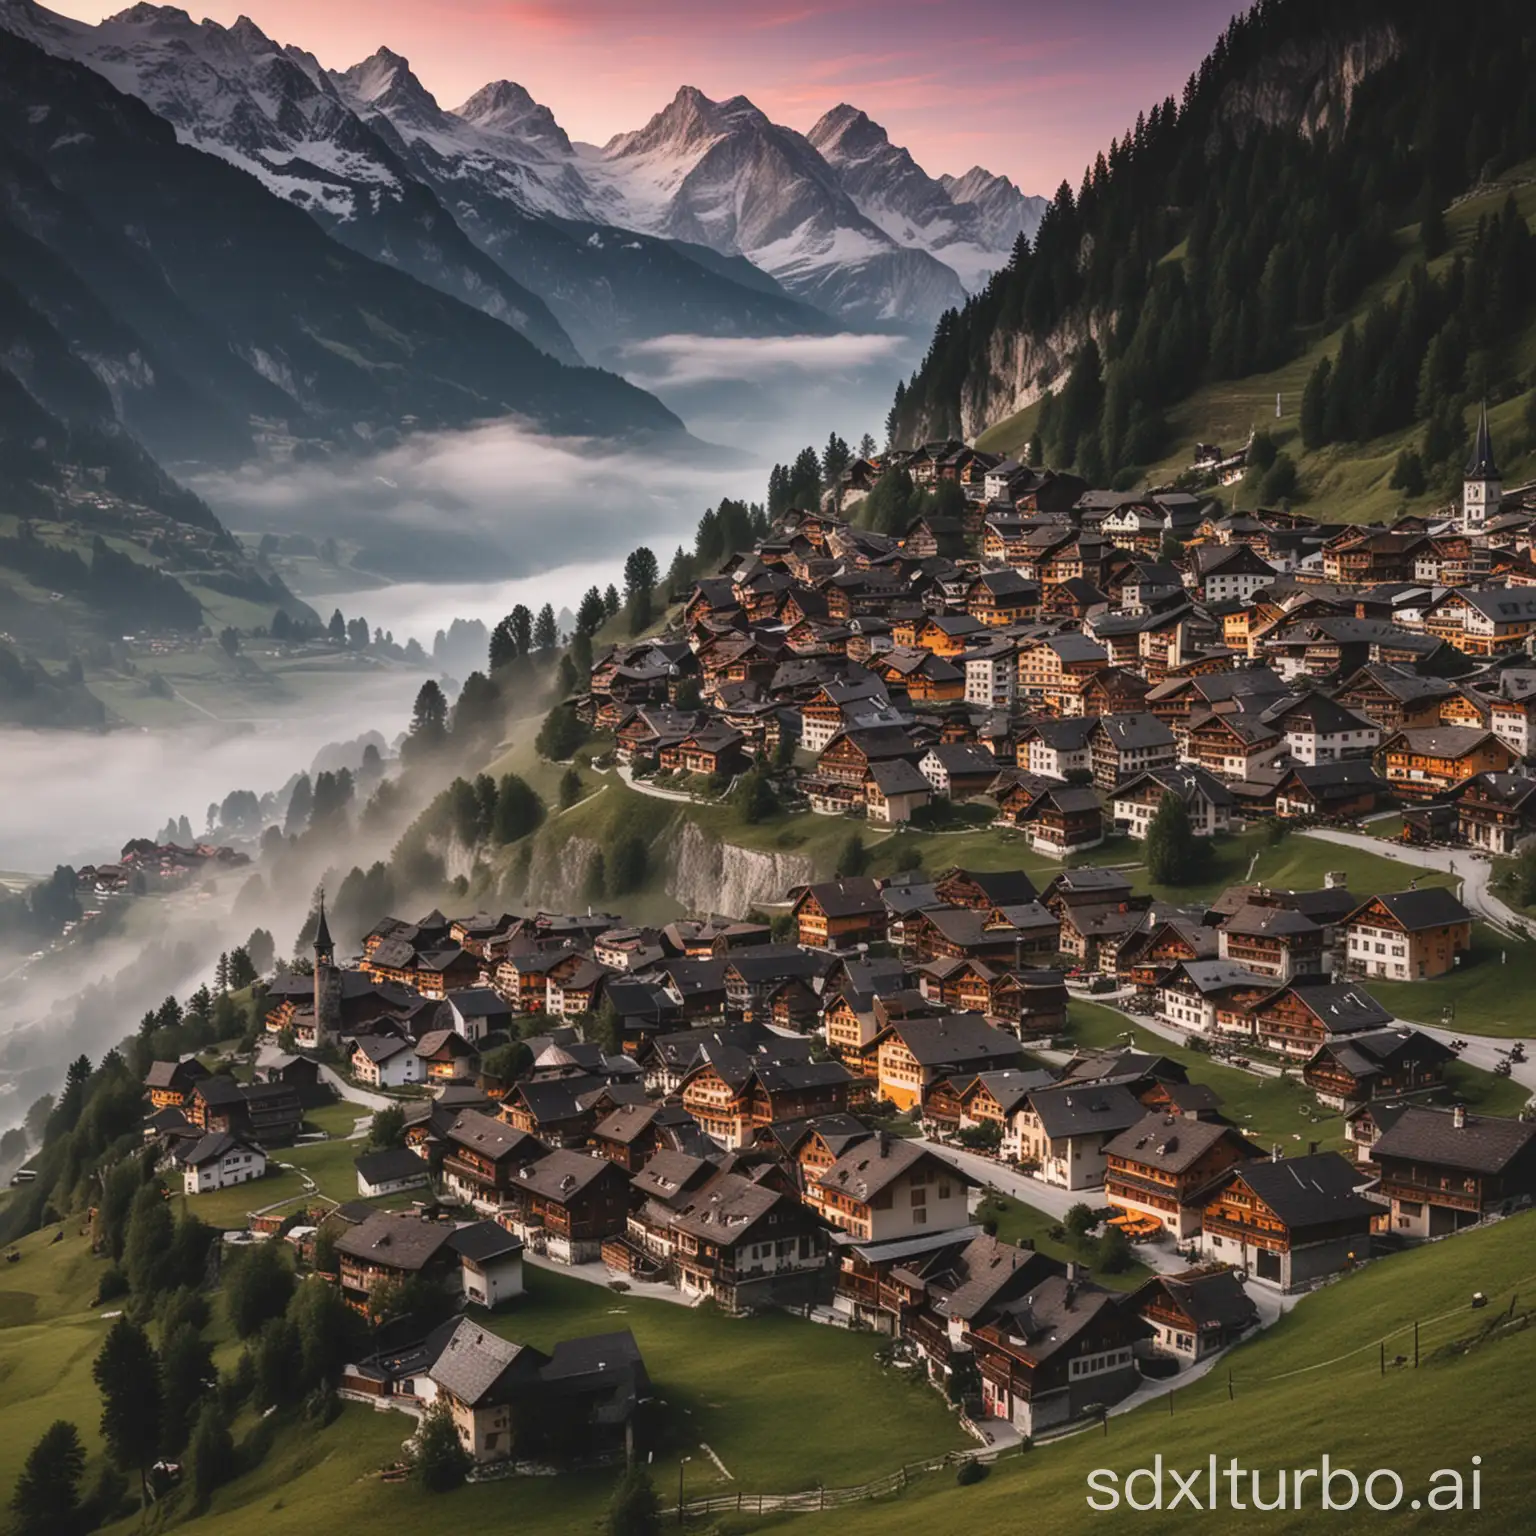 A village in the Swiss Alps at dawn